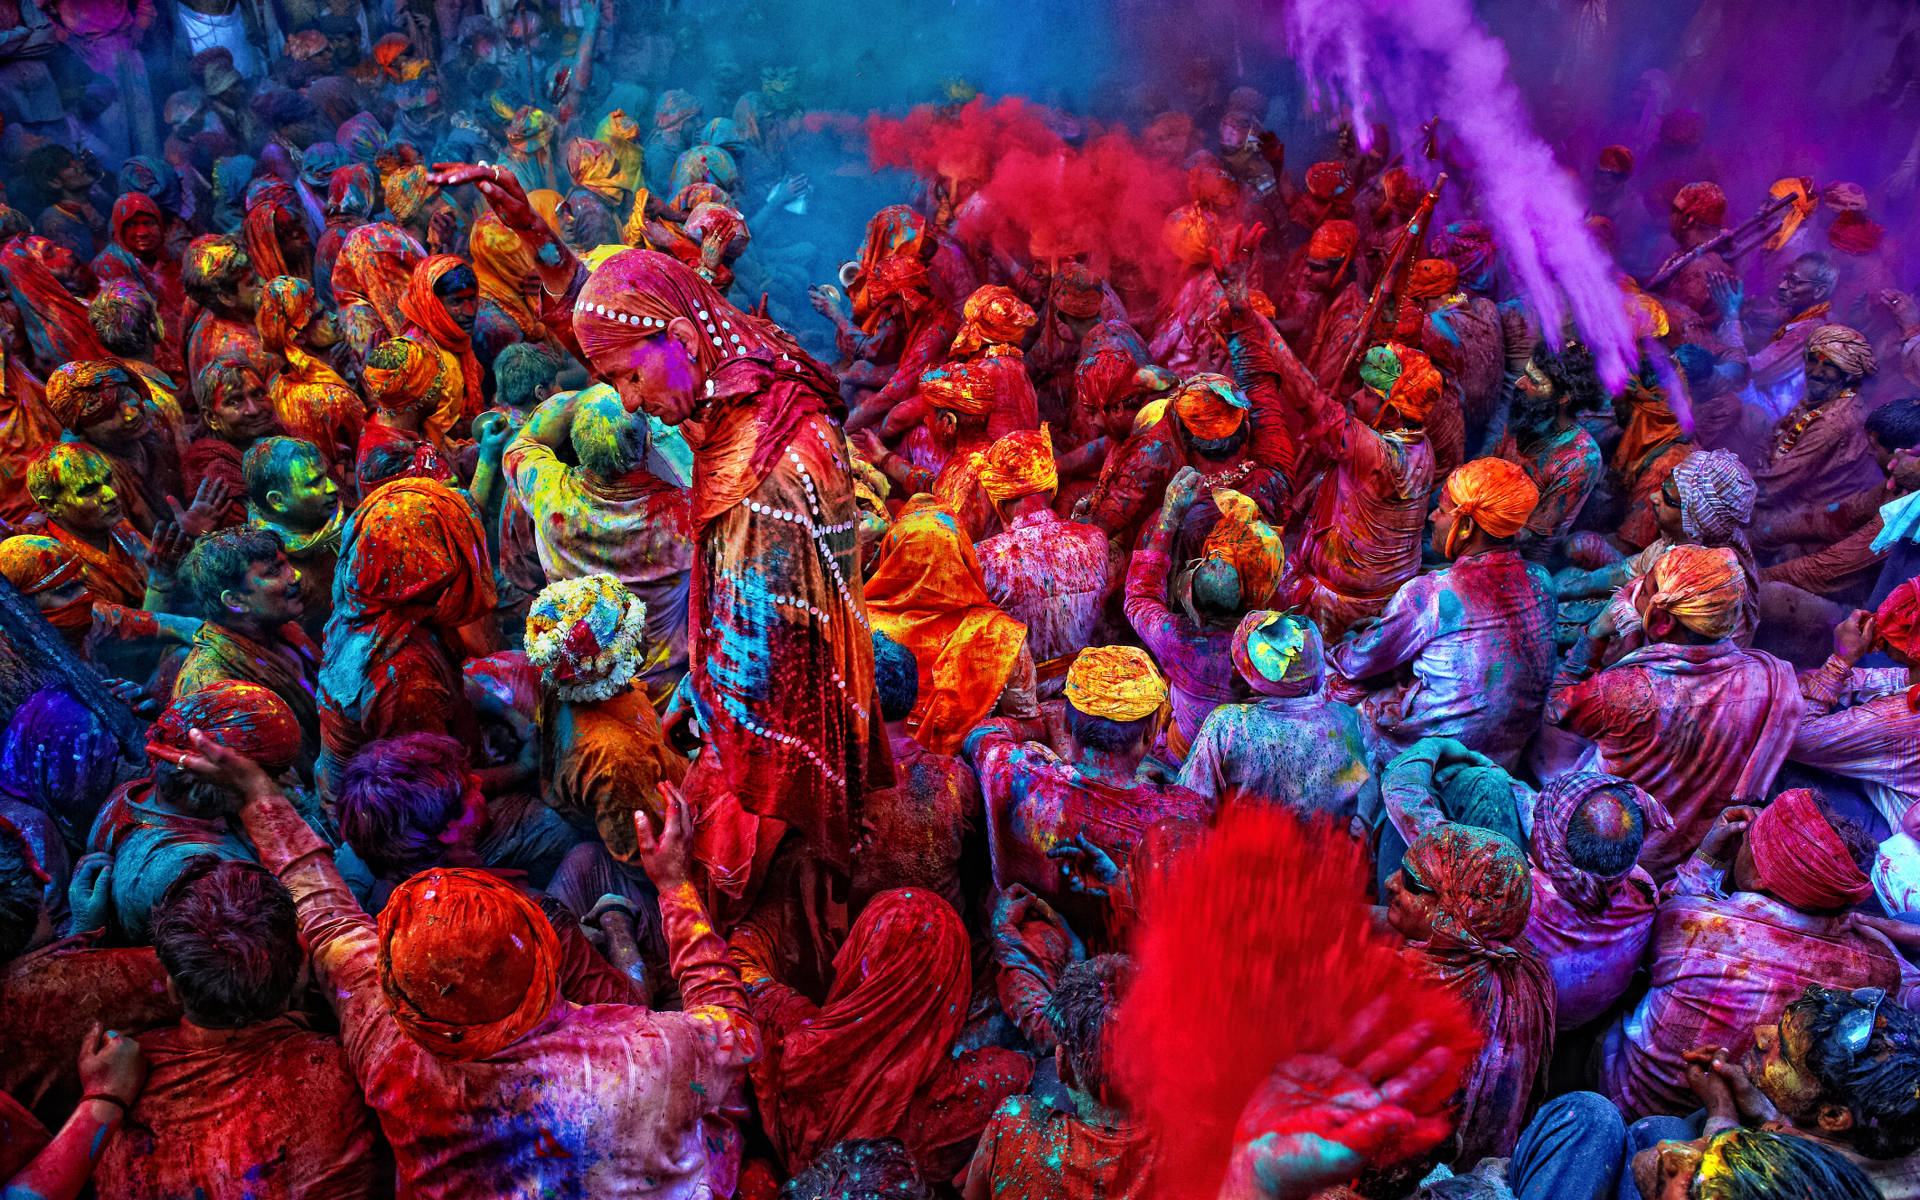 Celebrate Vibrancy And Joy With This Happy Holi Hd Image Depicting A Colorful Crowd. Background